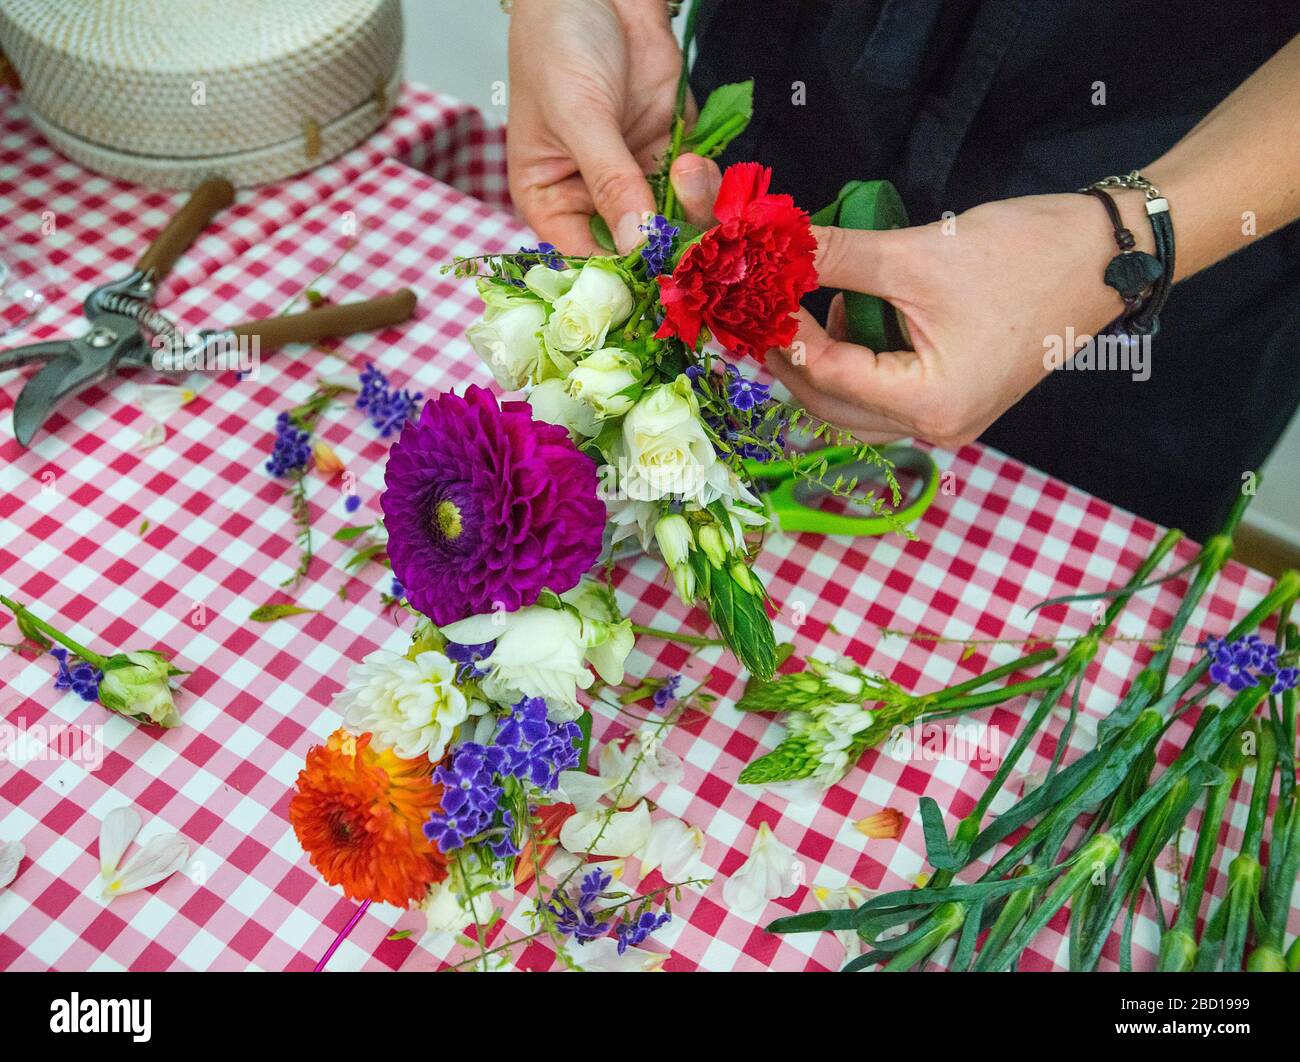 Flower arranging and attaching floral head dress band Stock Photo